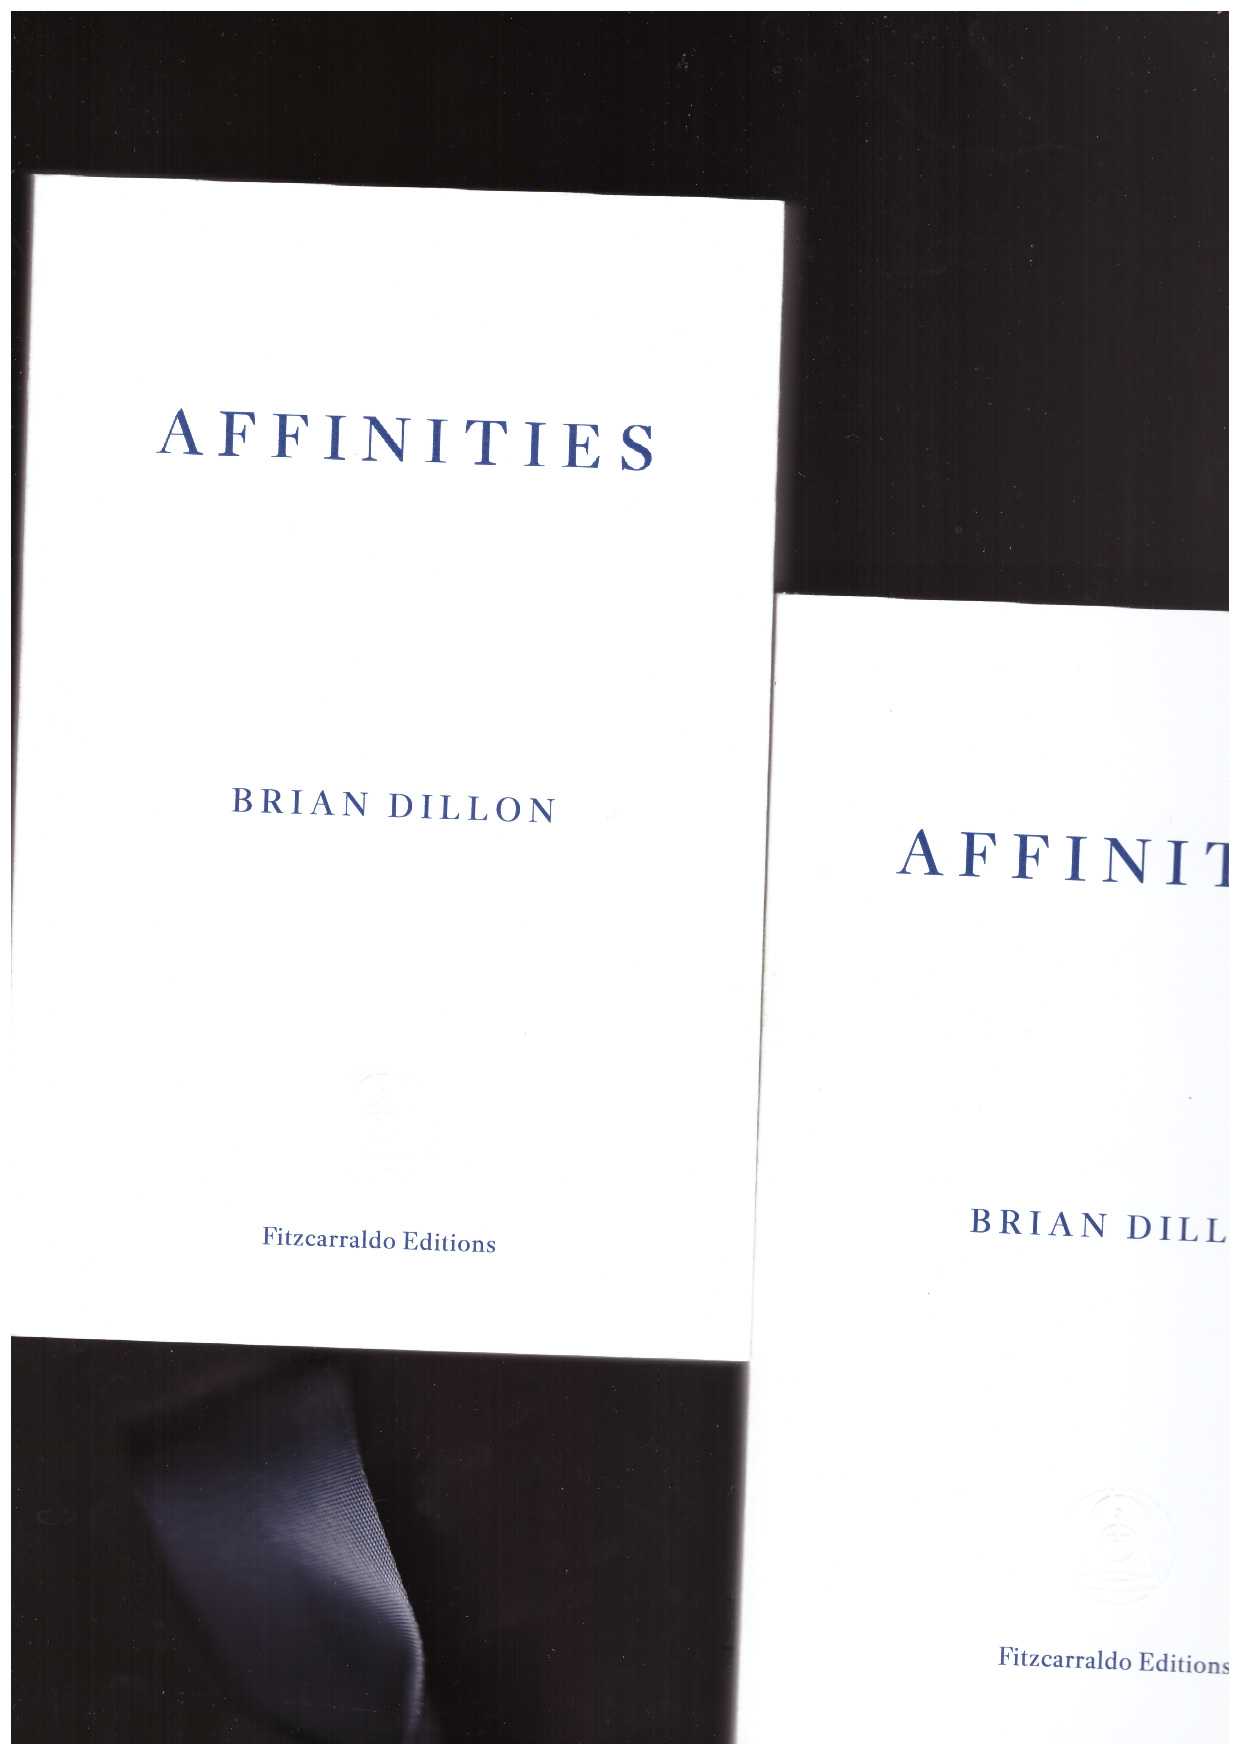 DILLON, Brian - Affinities